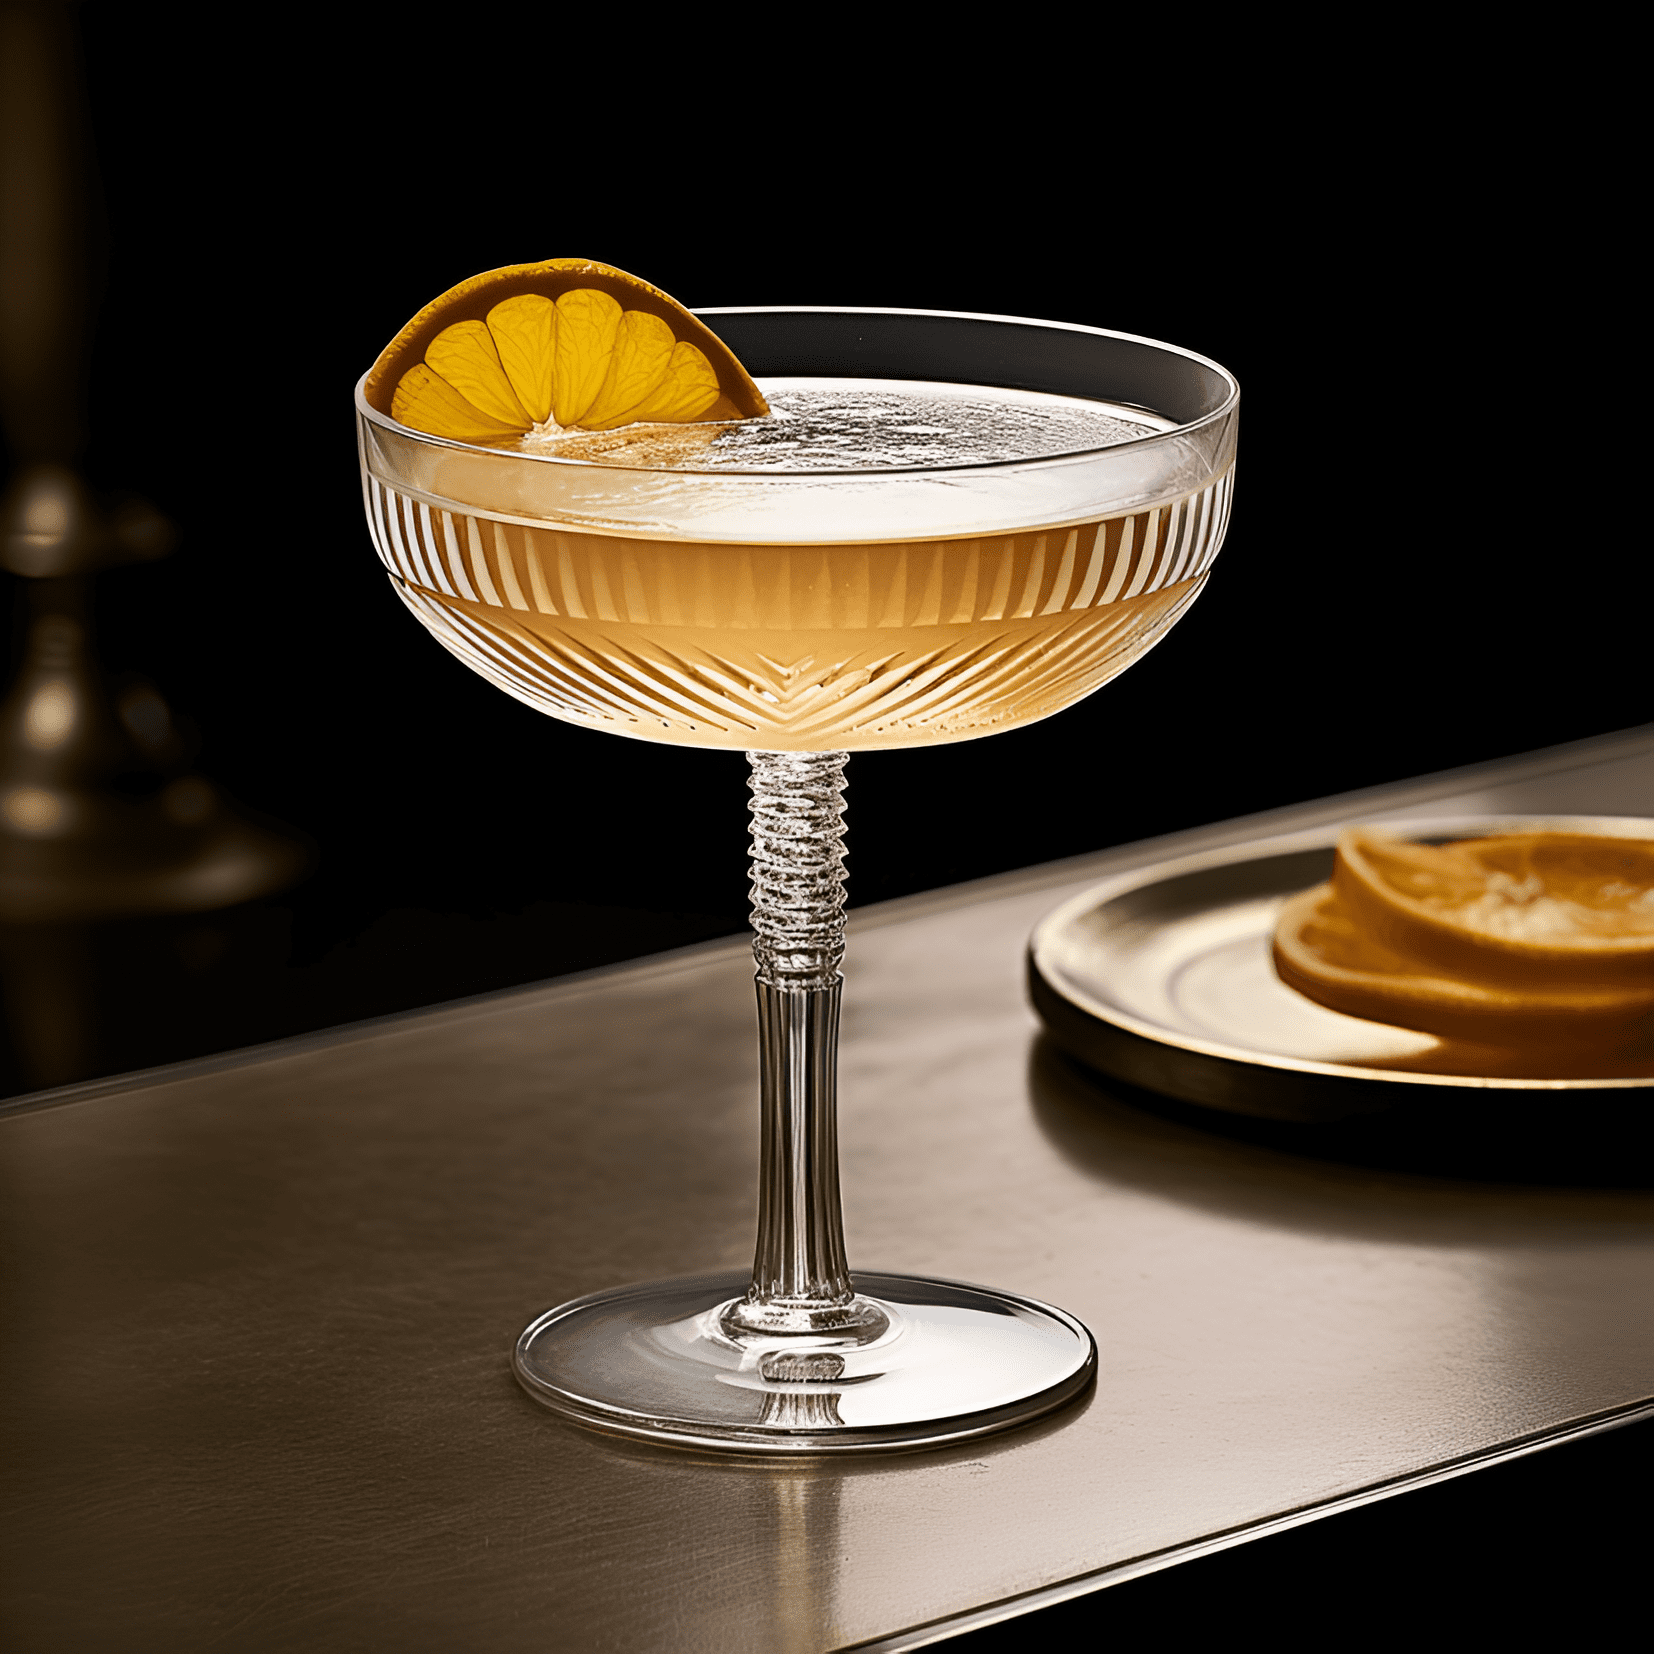 Orient Express Cocktail Recipe - The Orient Express cocktail is a delightful mix of sweet, sour, and slightly bitter flavors. The combination of gin, vermouth, and orange liqueur creates a smooth and balanced taste, while the addition of lemon juice adds a refreshing tang. The cocktail is strong, yet not overpowering, with a lingering finish that invites you to take another sip.